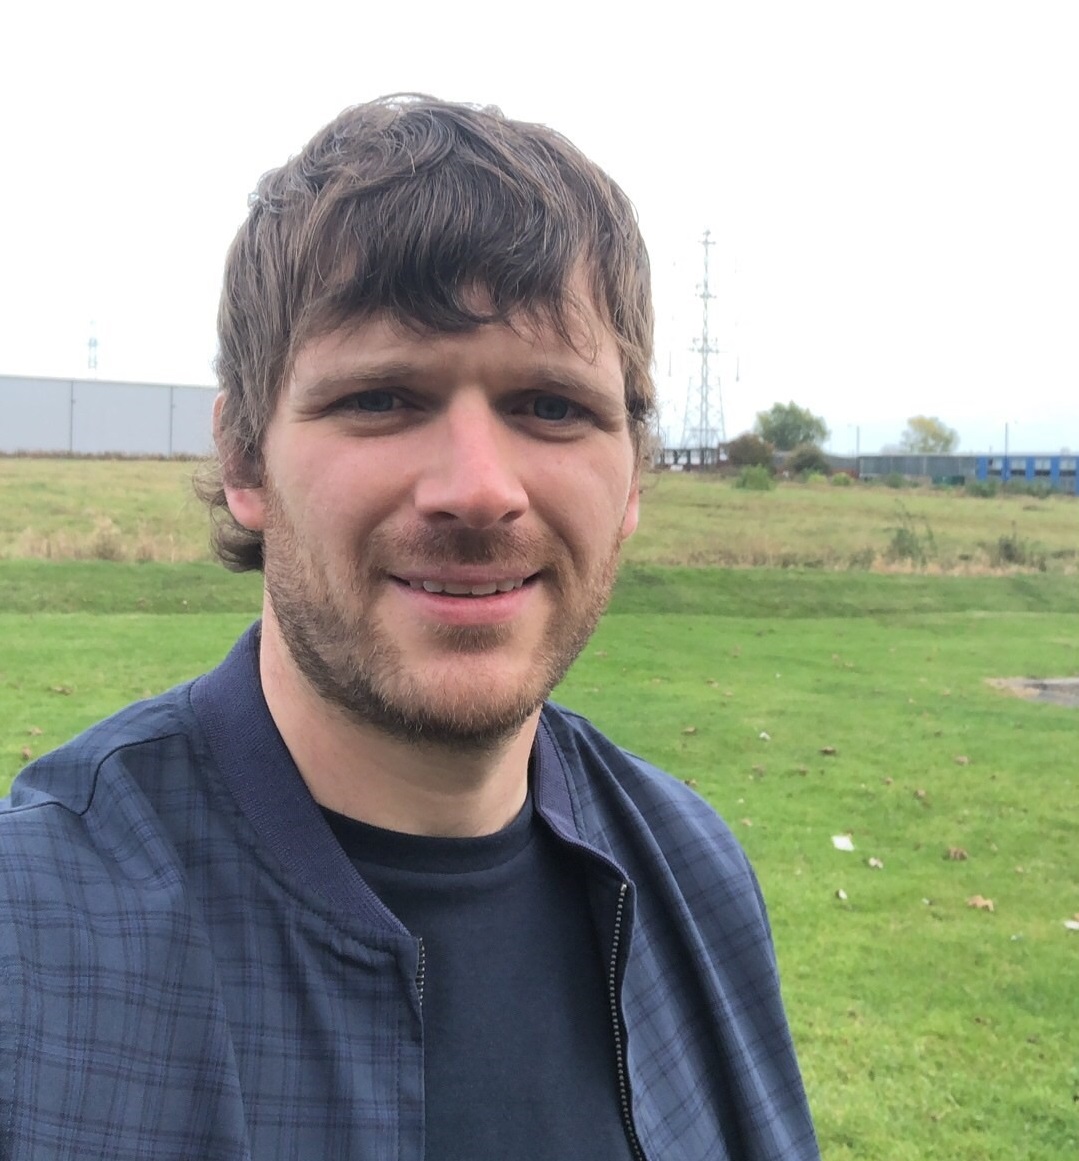 Have you ever thought about coming back to college, but worried that it’s been a while? 🤔 Meet Ryan, who returned to education after 12 years to study #MechanicalEngineering part-time with us, earning himself a promotion during his studies ➡️ bit.ly/ncRyanTaylor